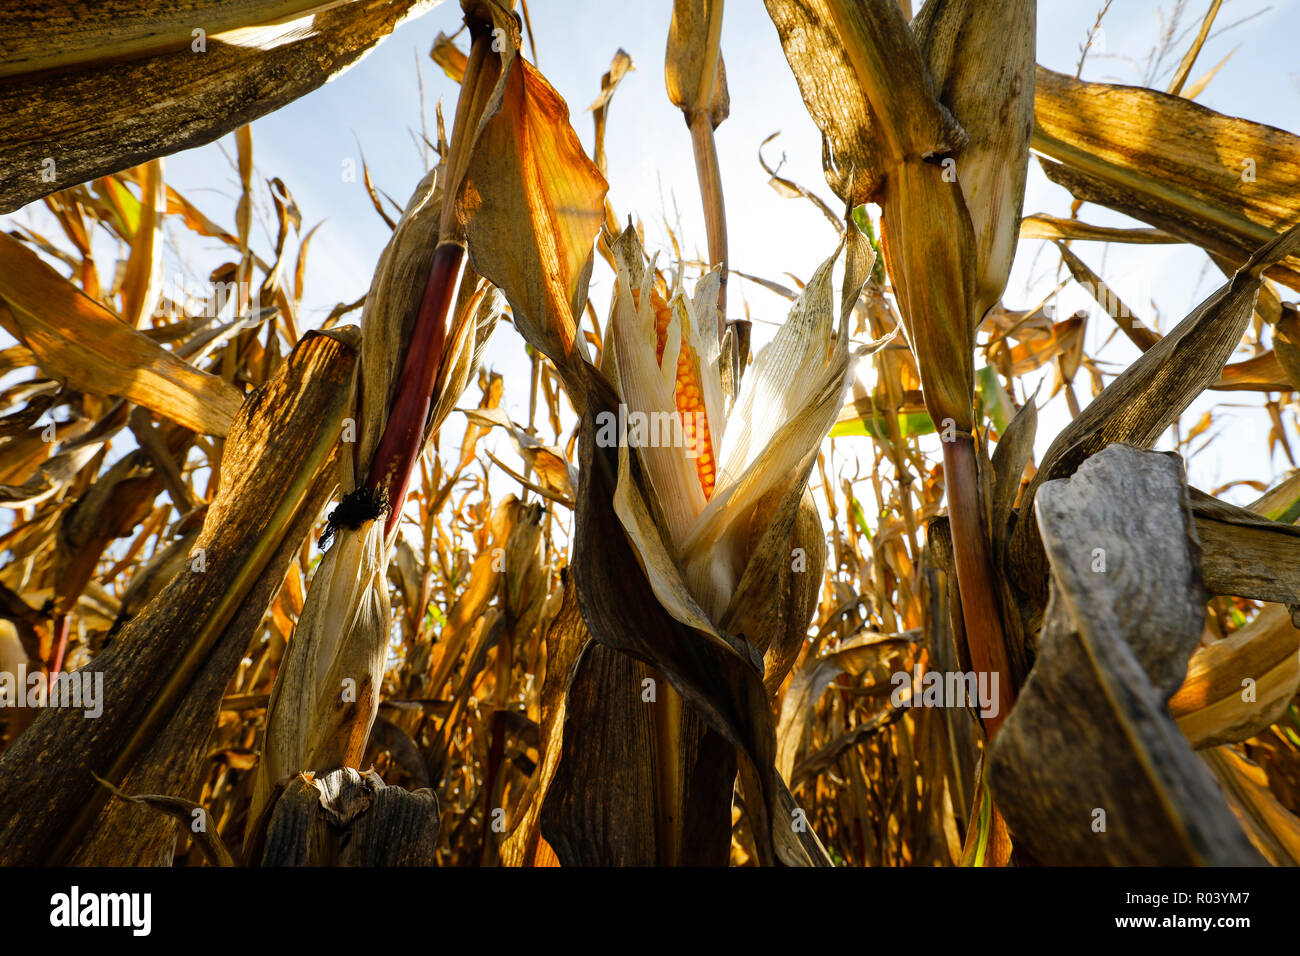 Maize field in hot summer, Germany Stock Photo